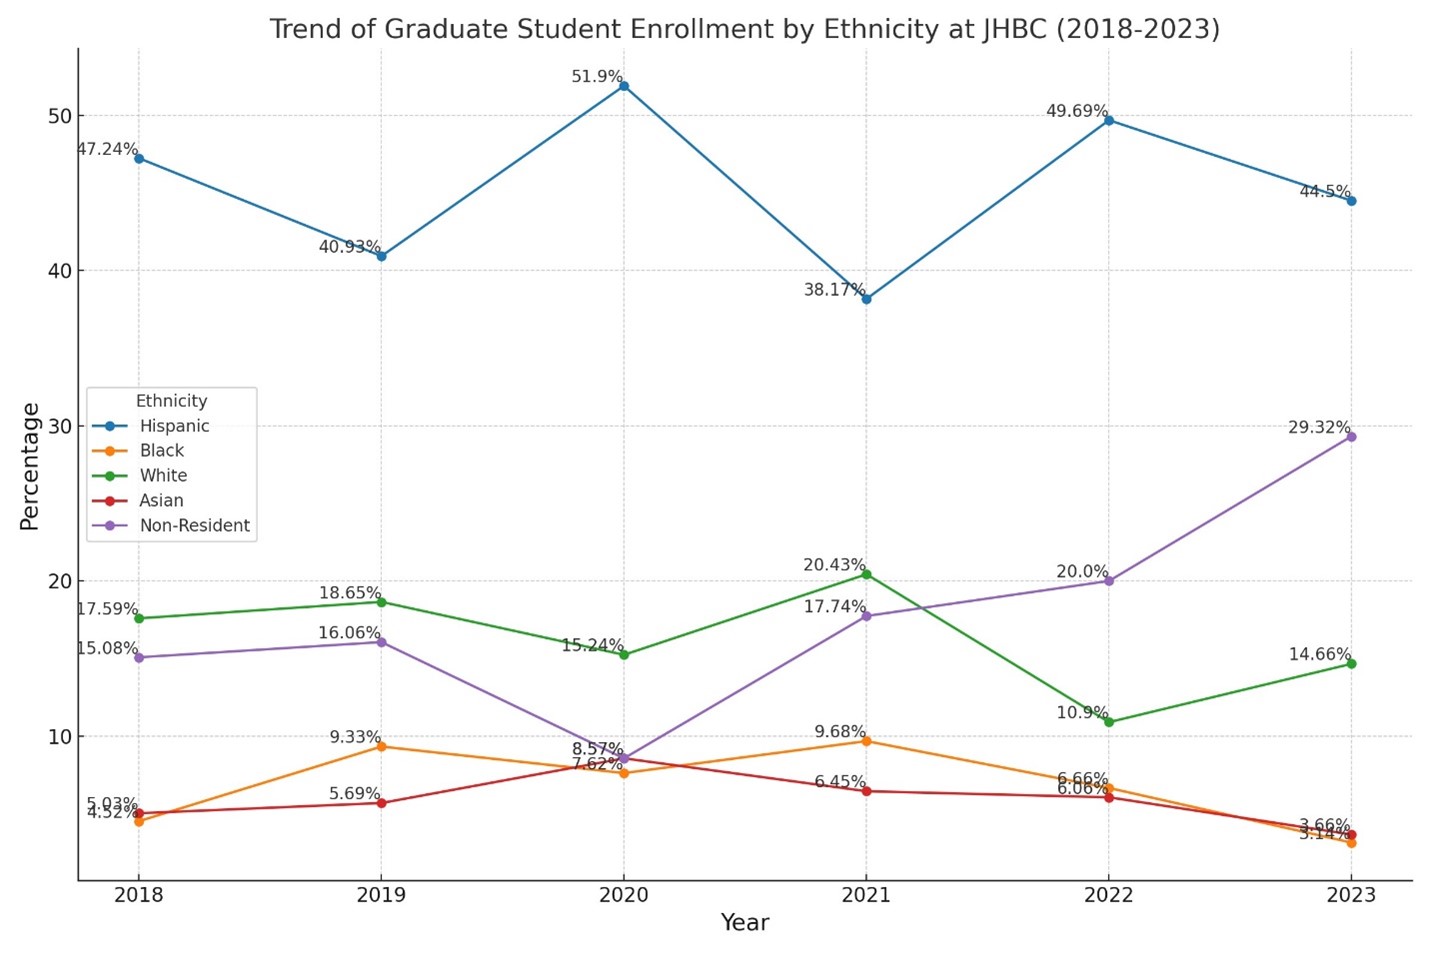 Trend of graduate student enrollment by ethnicity at JHBC (2018 - 2023)